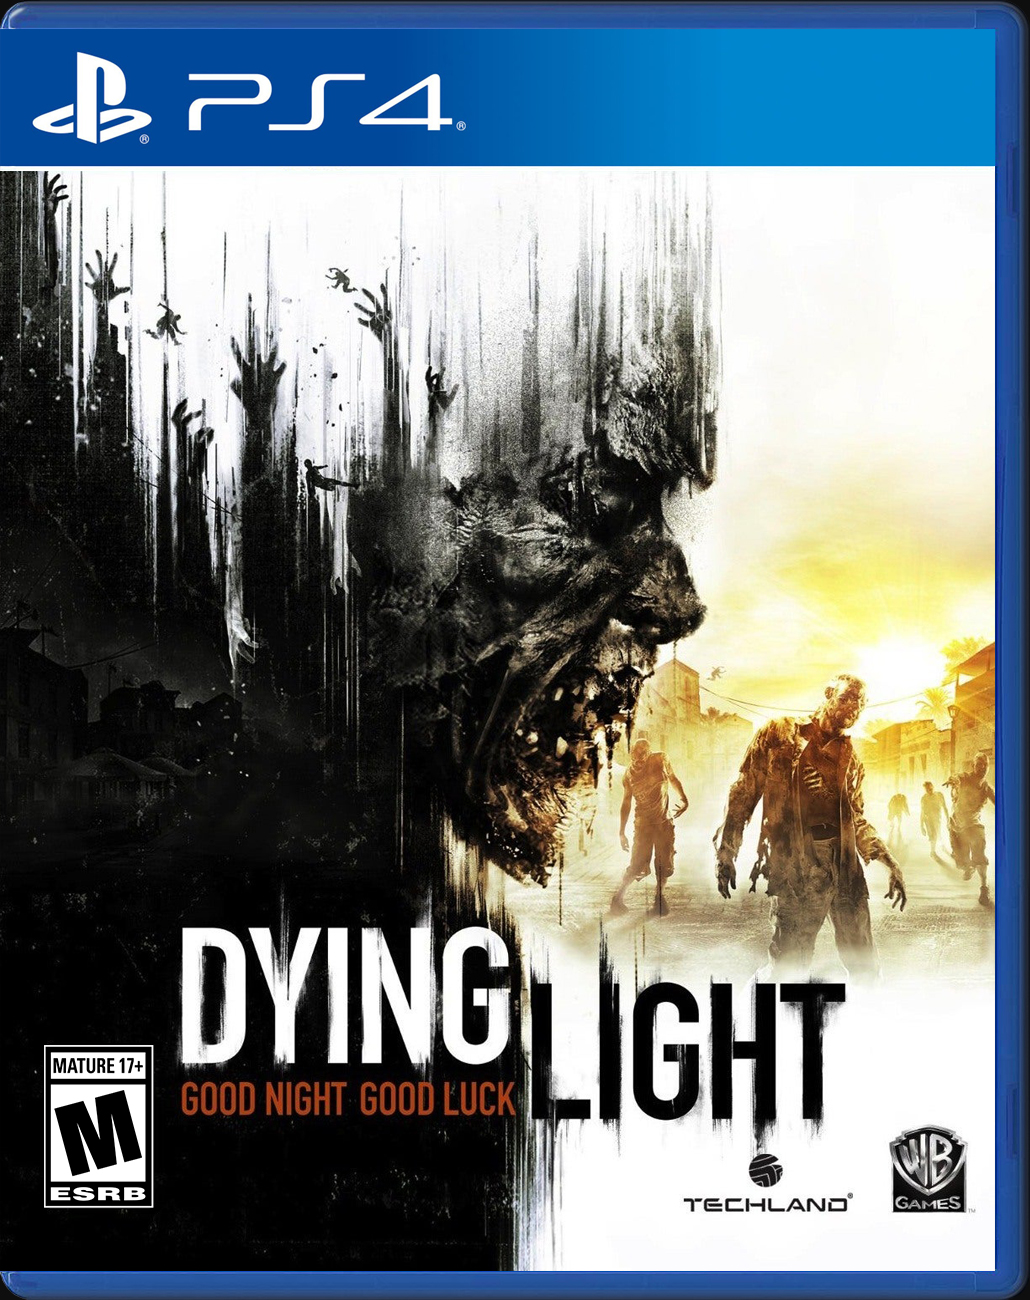 

Dying Light PS4 Case

